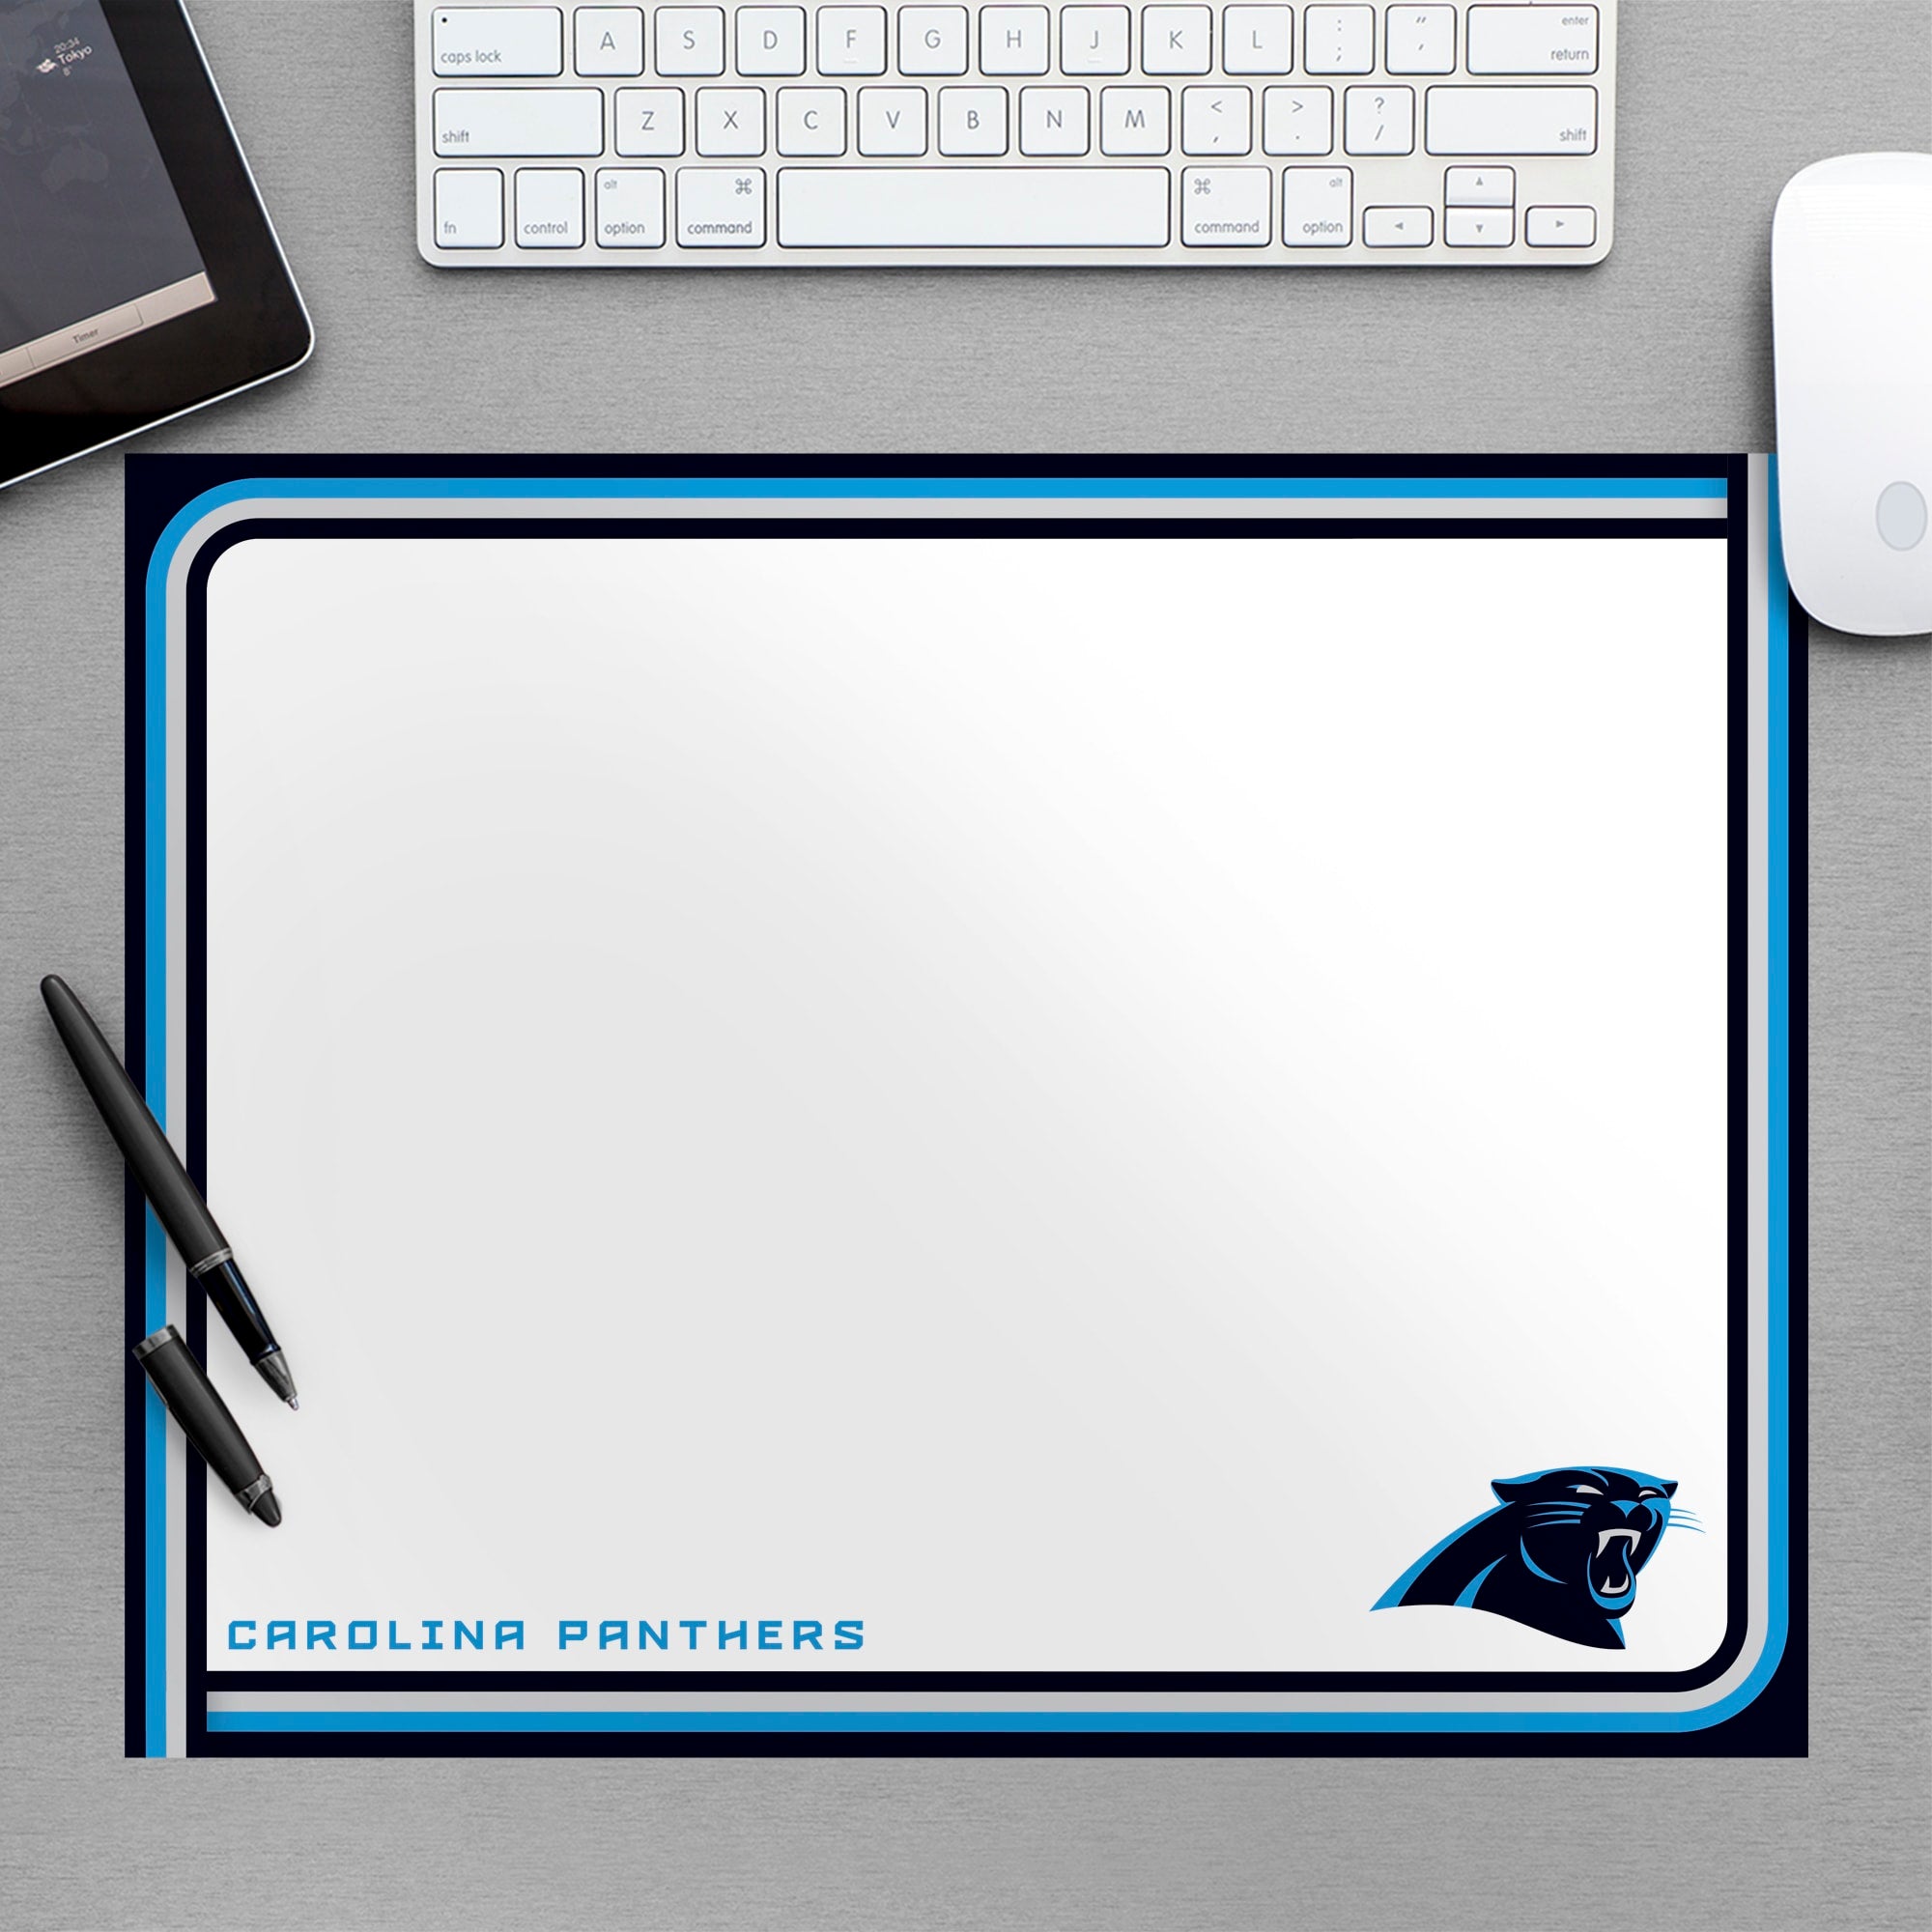 Carolina Panthers: Dry Erase Whiteboard - Officially Licensed NFL Removable Wall Decal Large by Fathead | Vinyl